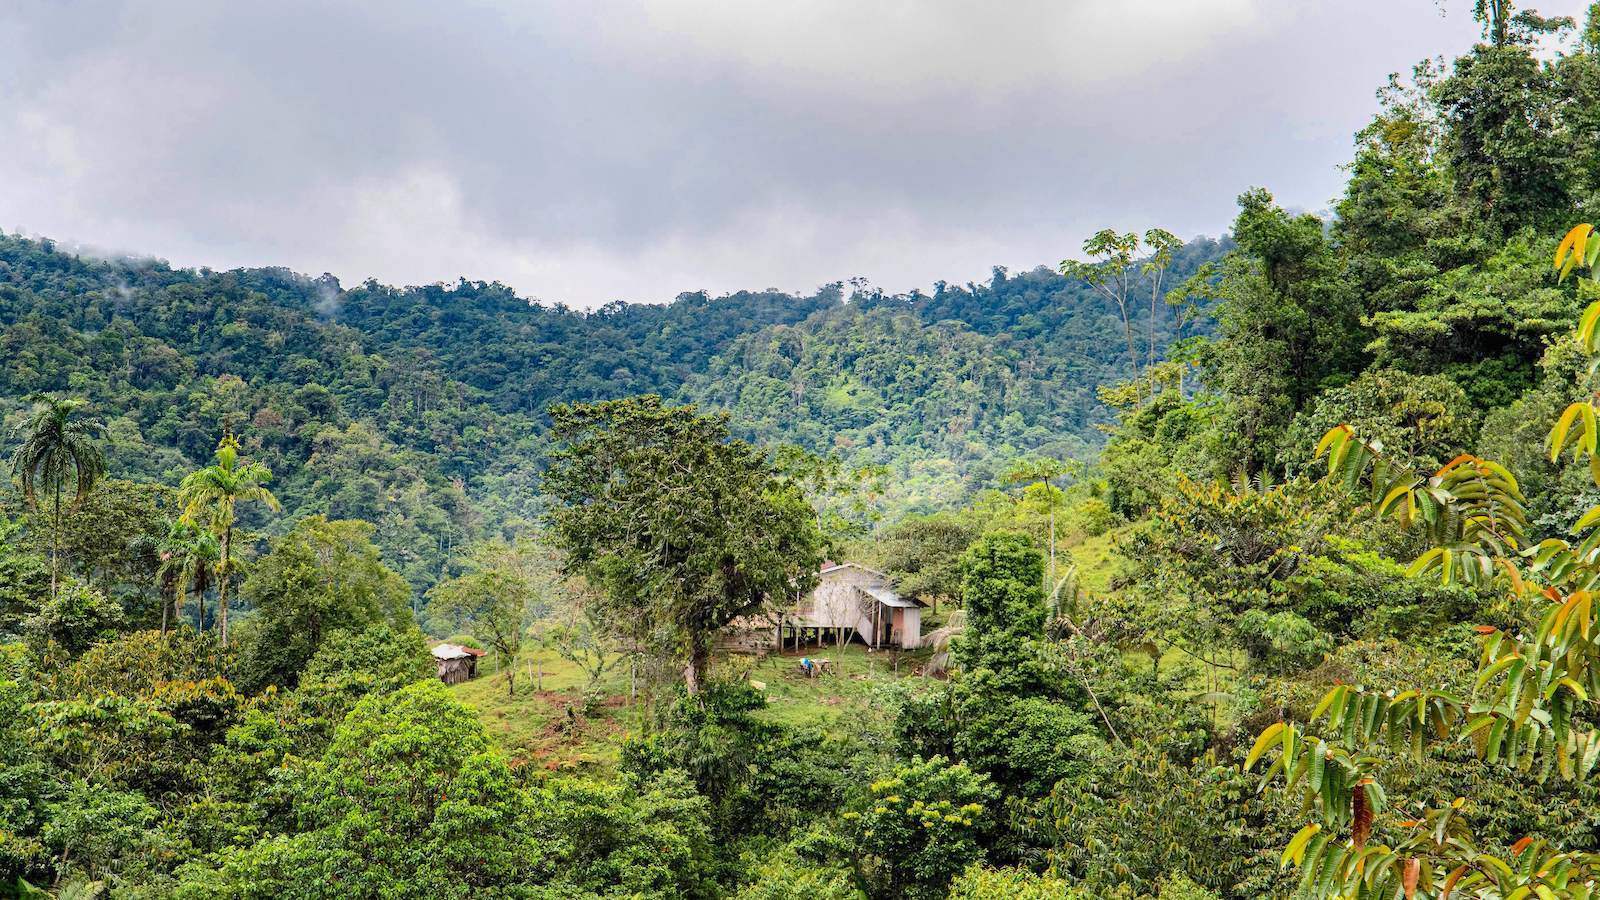 Lauded as Green Model, Costa Rica Faces Unrest in Its Forests